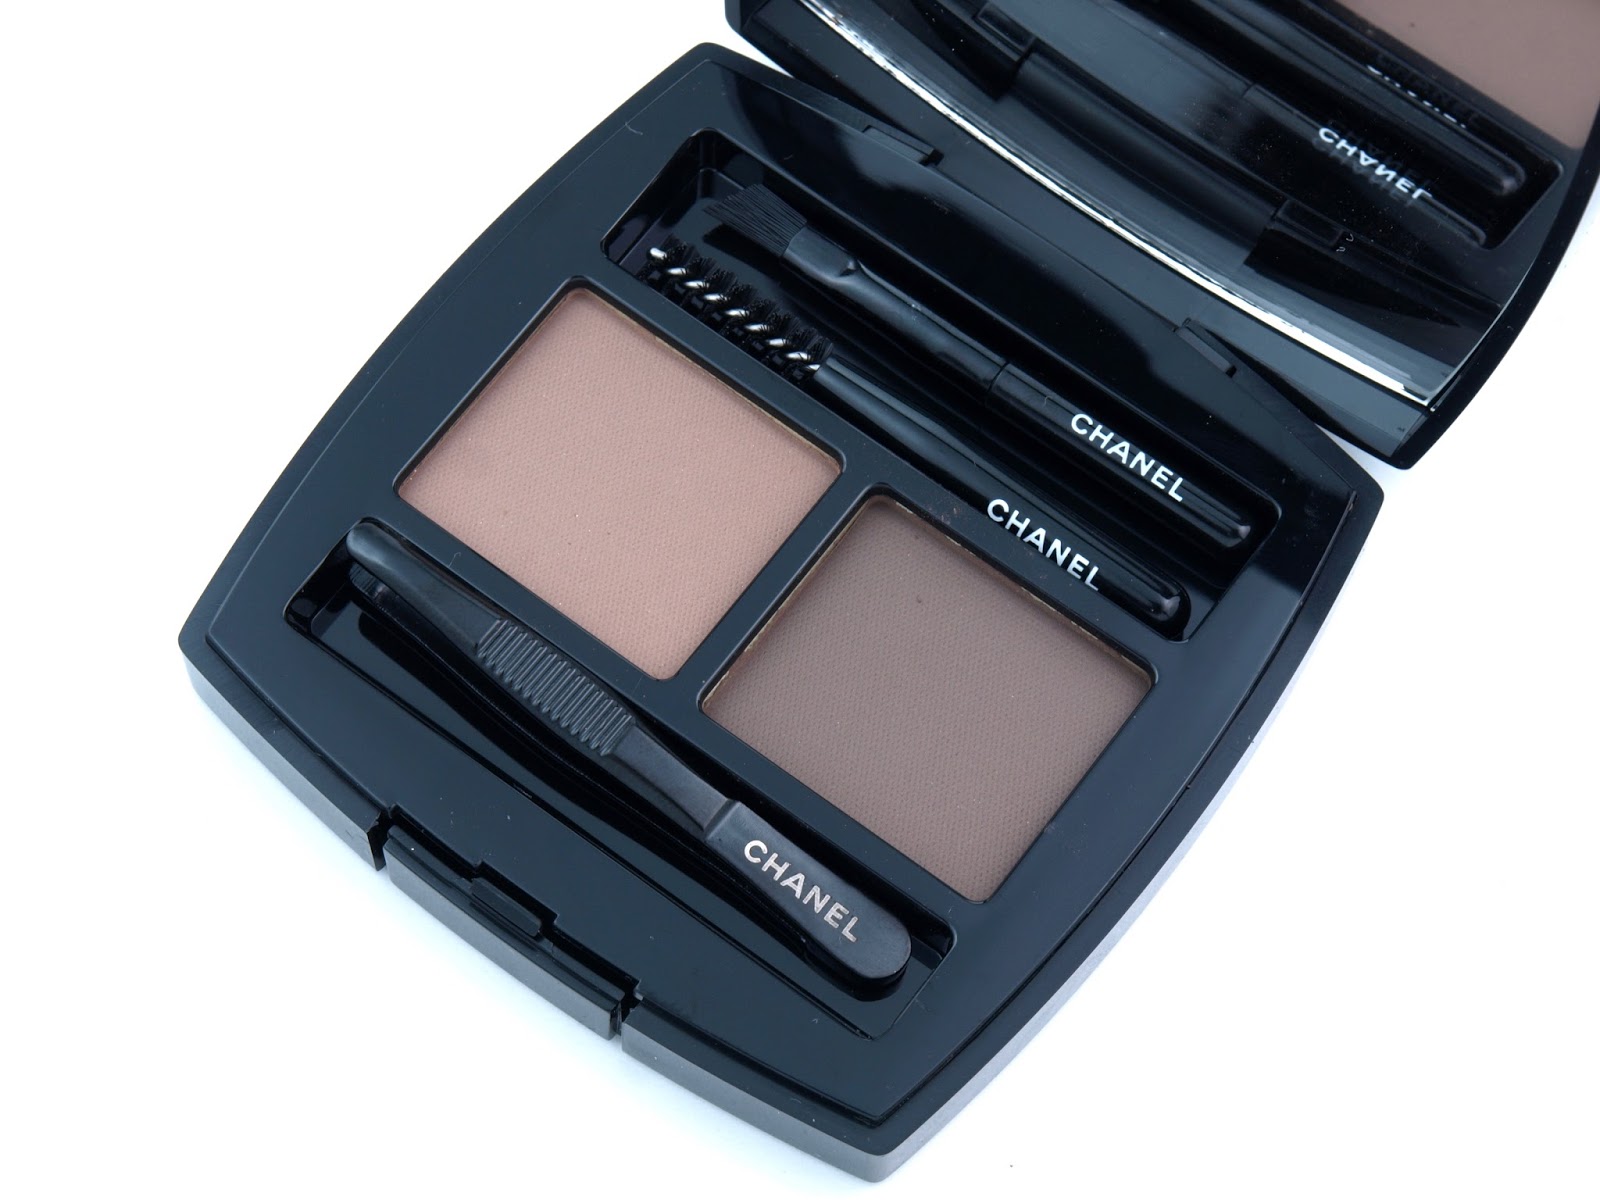 Chanel La Palette Sourcils de Chanel Brow Powder Duo in 40 Naturel:  Review and Swatches